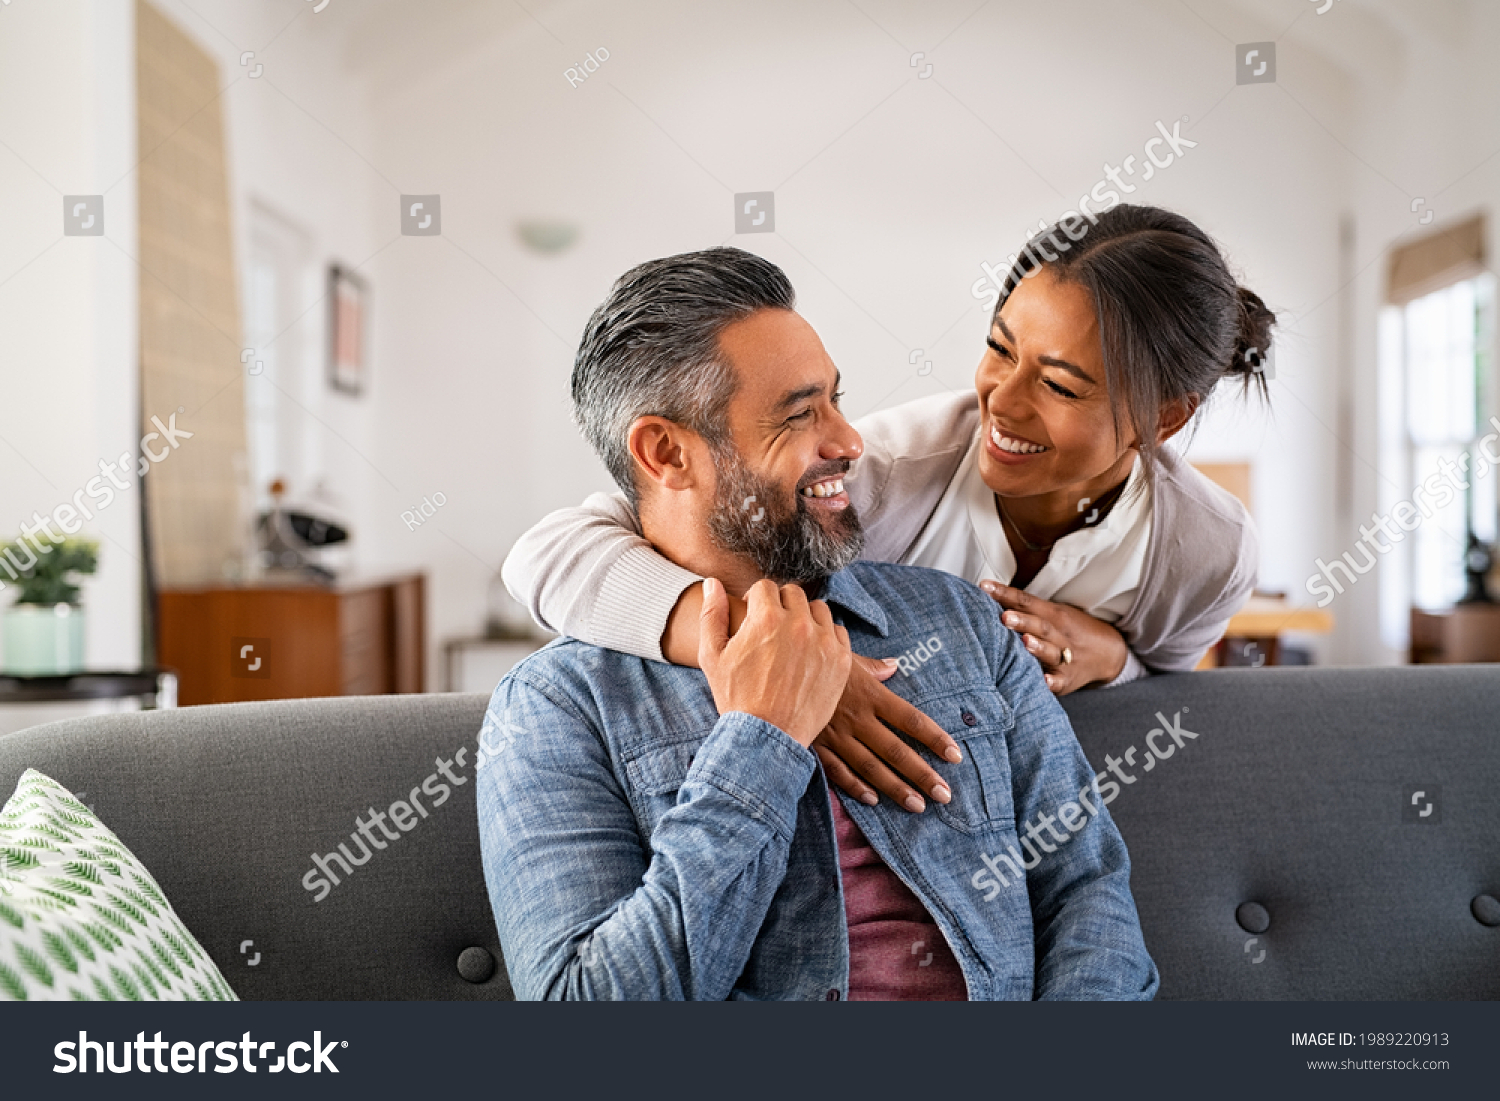 Smiling ethnic woman hugging her husband on the couch from behind in the living room. Middle eastern man having fun with his beautiful young wife on the couch. Mid adult indian man with latin woman. #1989220913